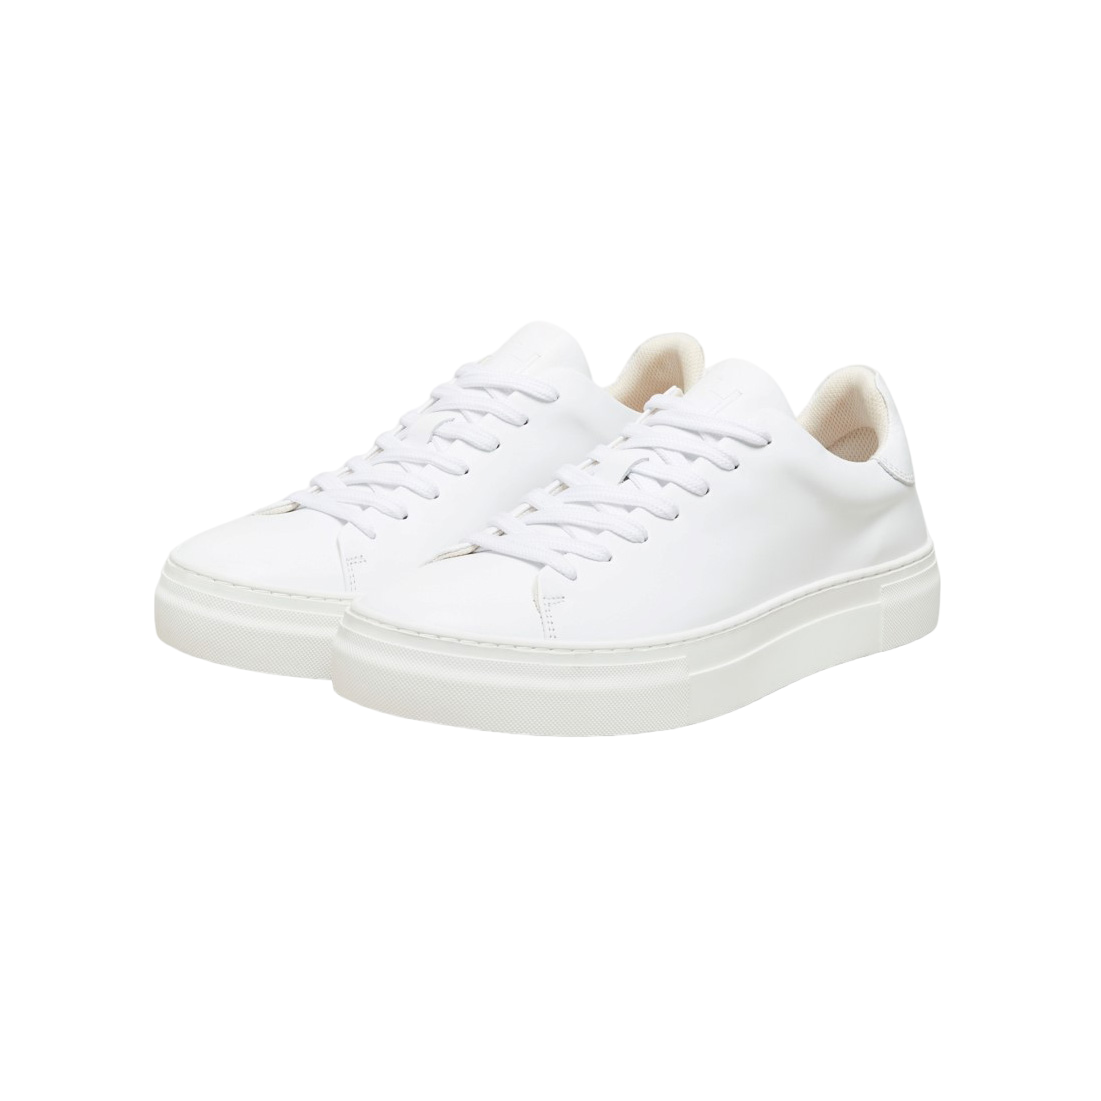 David Chunky Leather Trainer - White